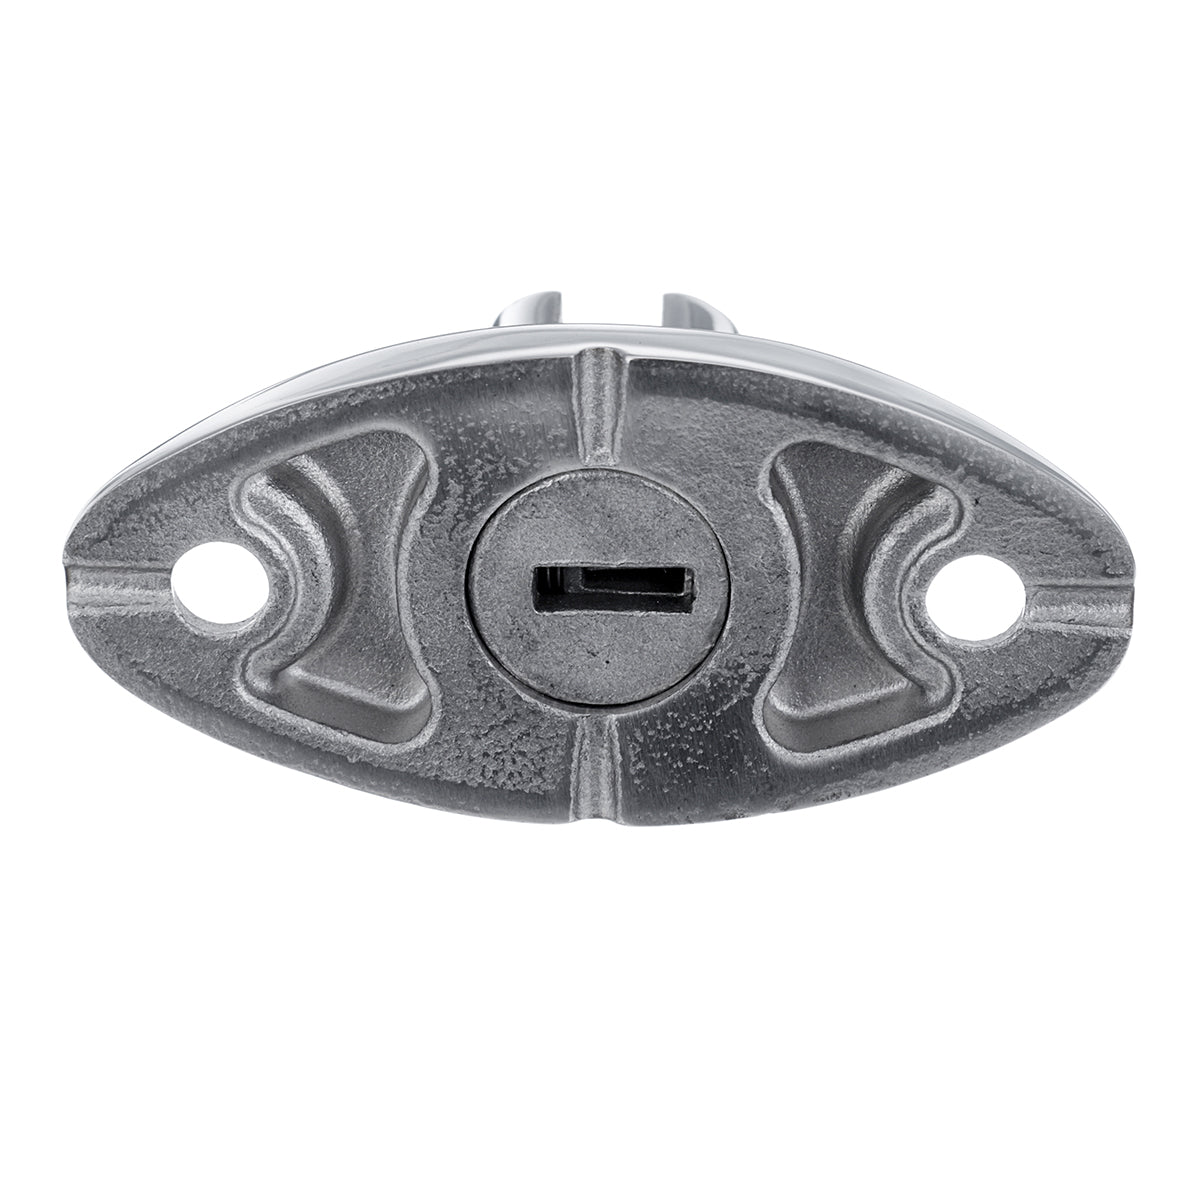 Slate Gray 360° Rotated Deck Hinge Connector Stainless Steel Boat Marine Fitting Hardware